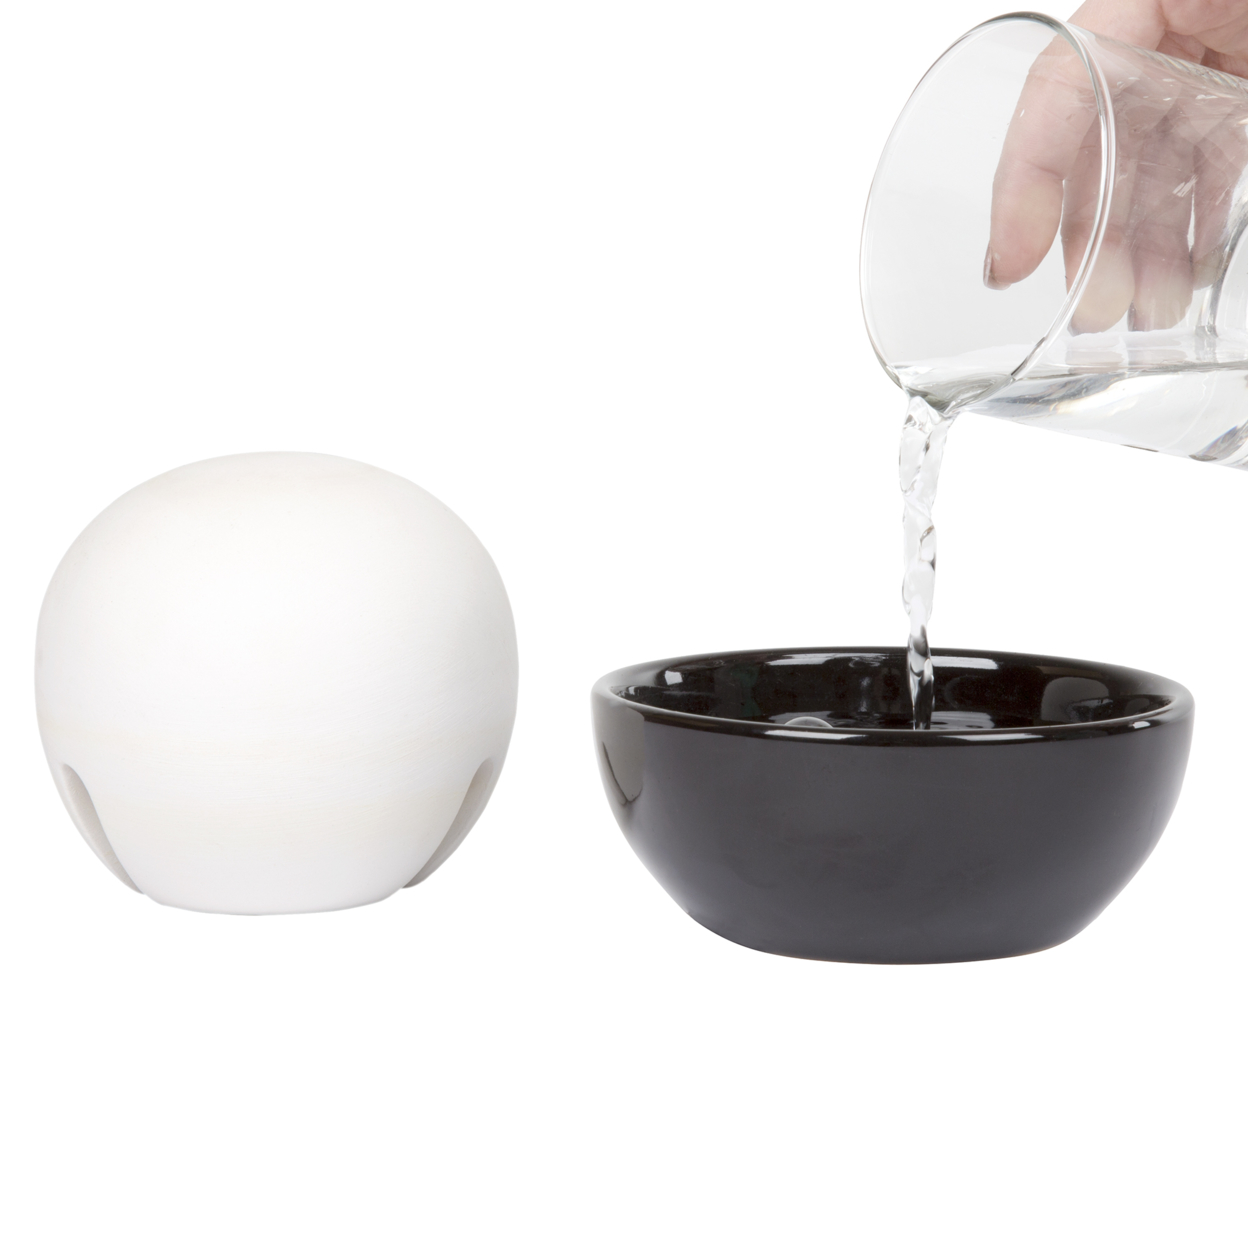 Room Humidifiers Set Of 2 Put Moisture Back In The Air And Makes A Great Home Or Table Decoration